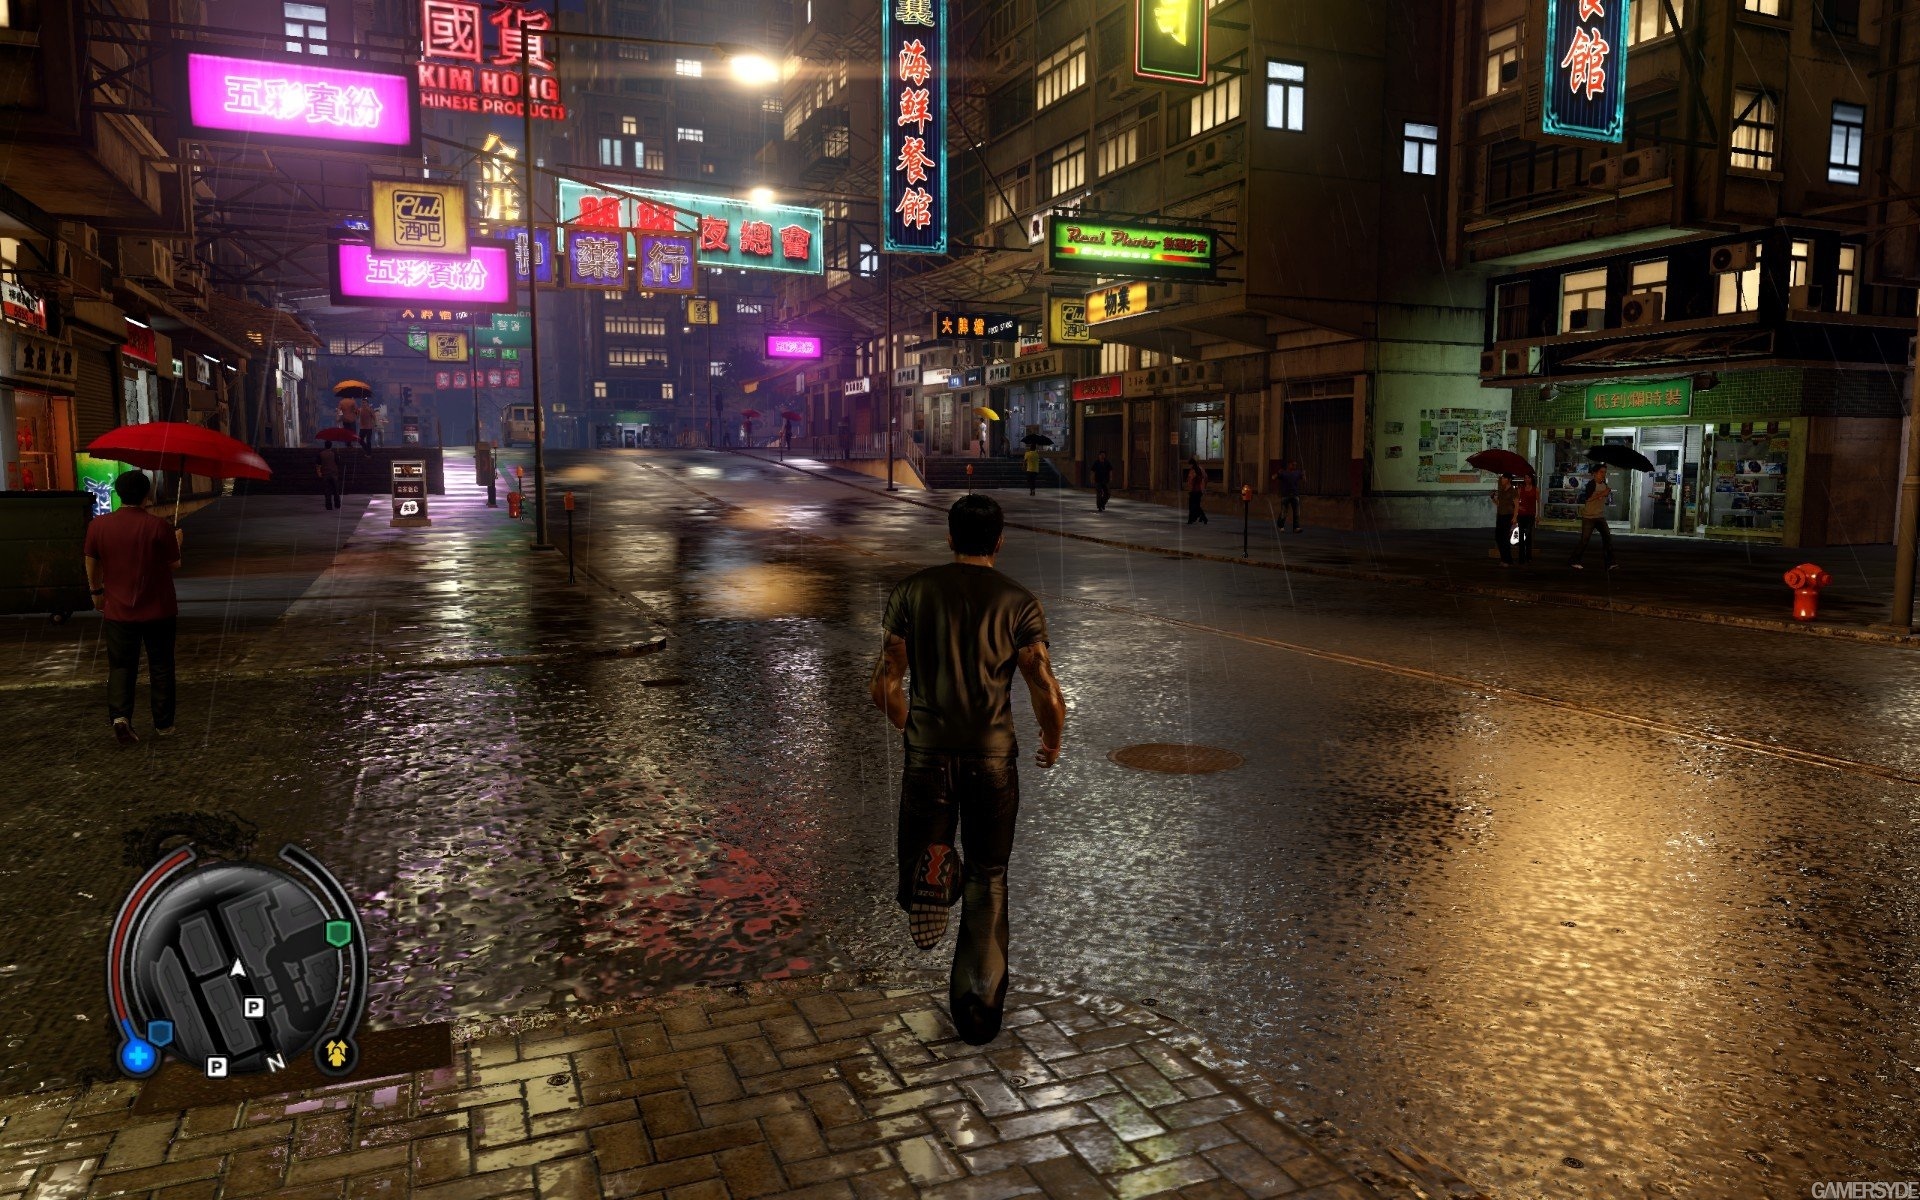 Sleeping Dogs: A Near Masterpiece with Immersive Gameplay and Intense  Action — Eightify